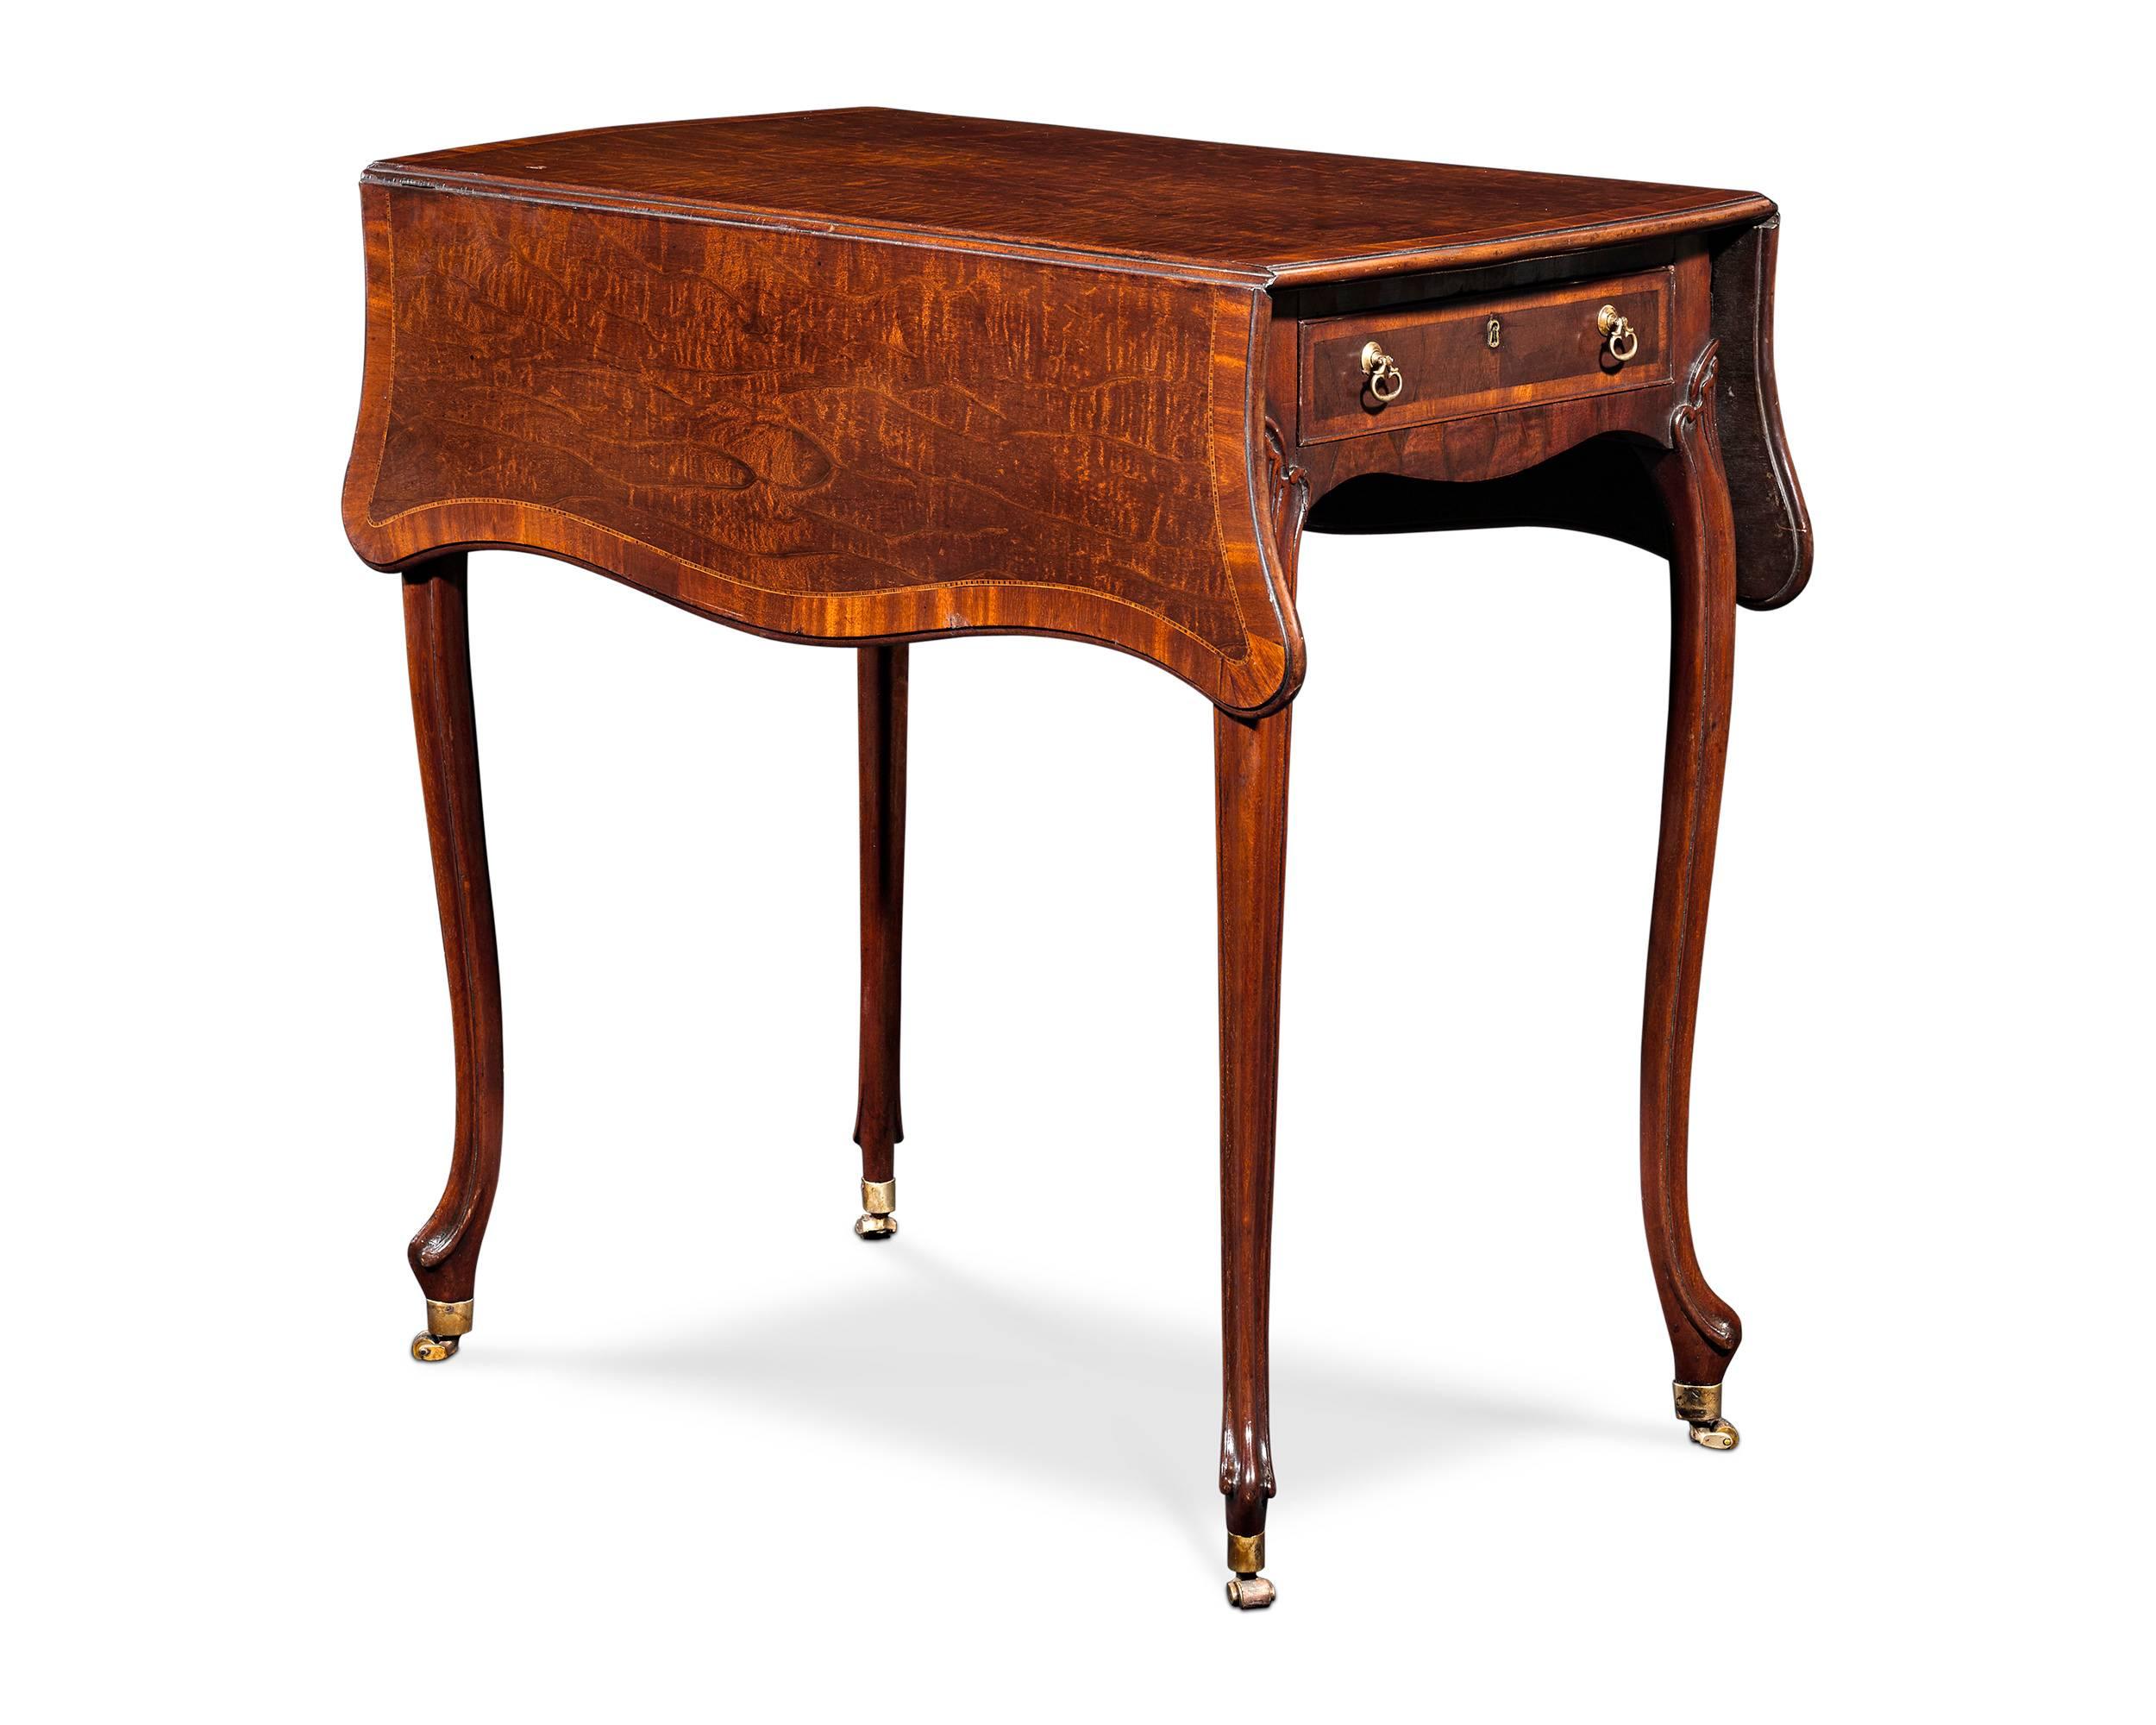 Close examination of the very distinctive workmanship and design of this incredible Pembroke table, and it becomes clear that it is almost certainly a creation of the great Thomas Chippendale. Taken together, the distinguishing characteristics of